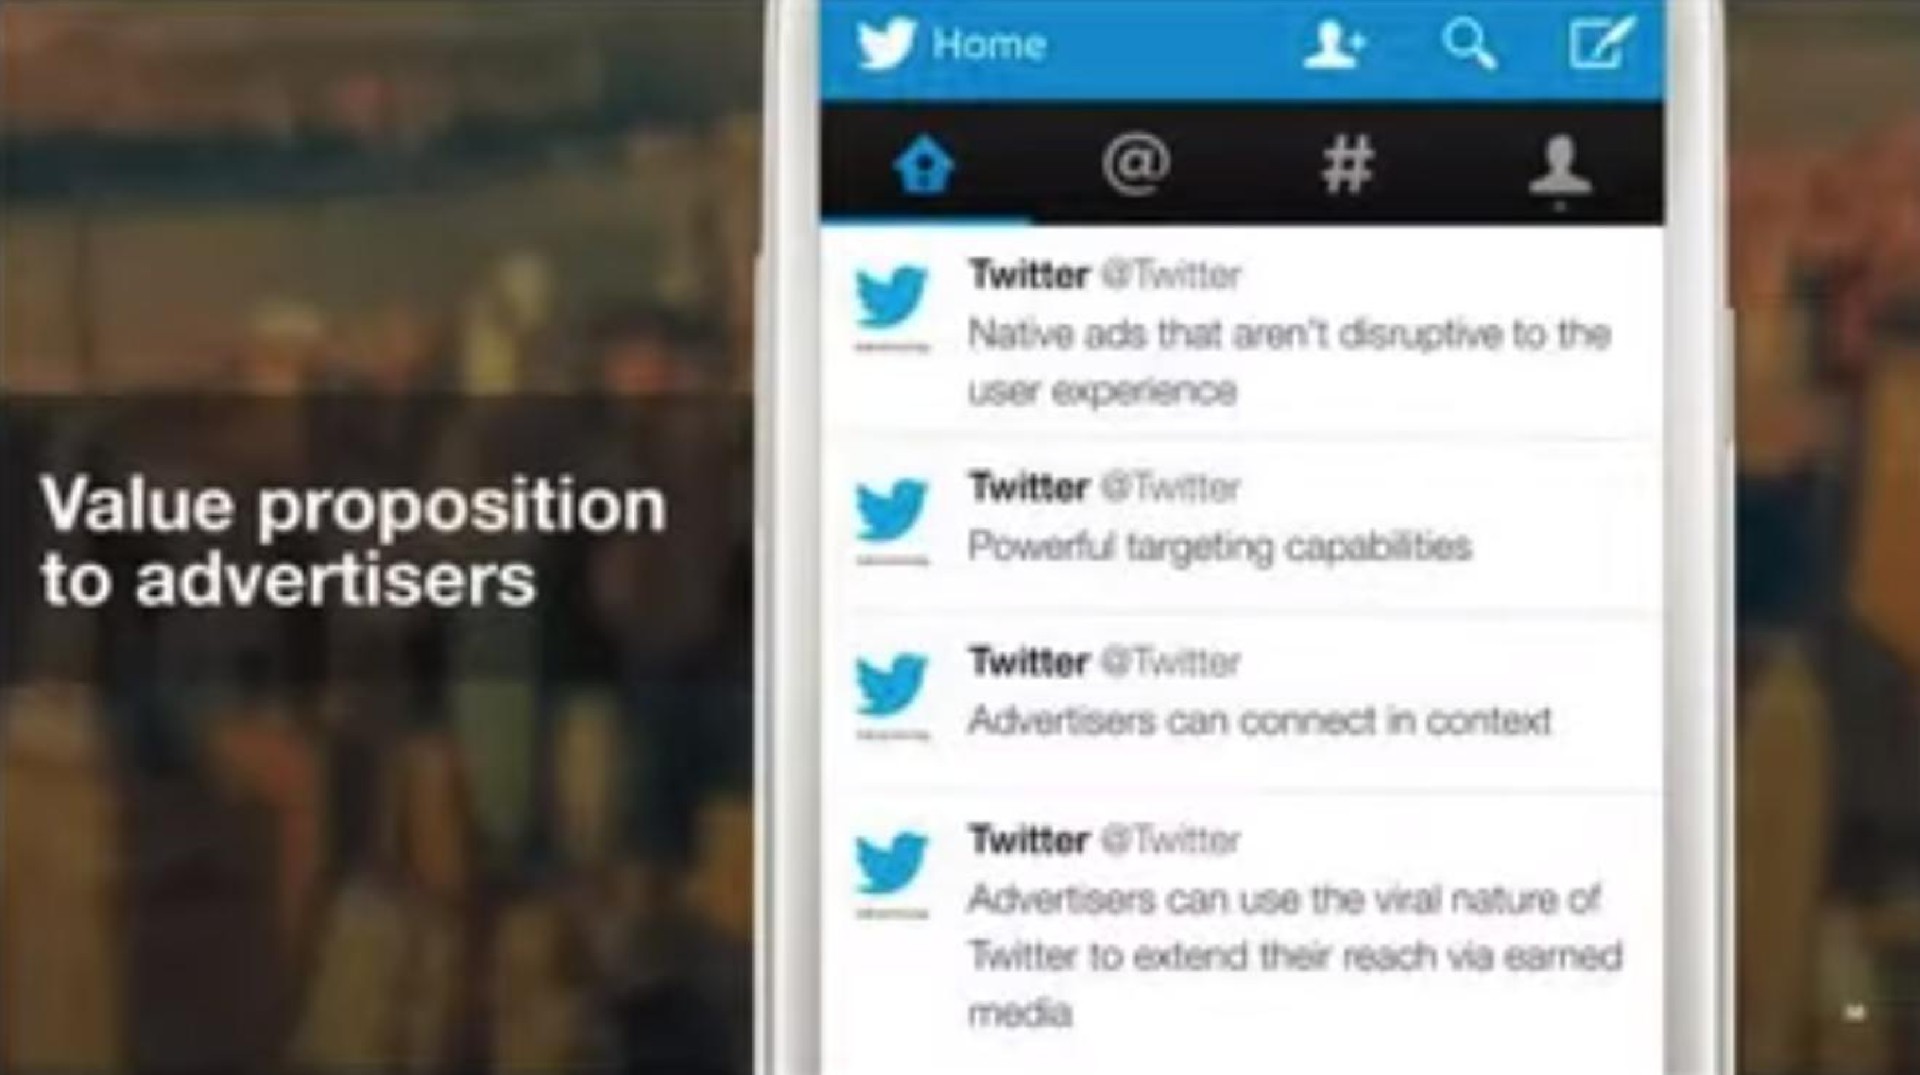 vane value proposition to advertisers | Twitter